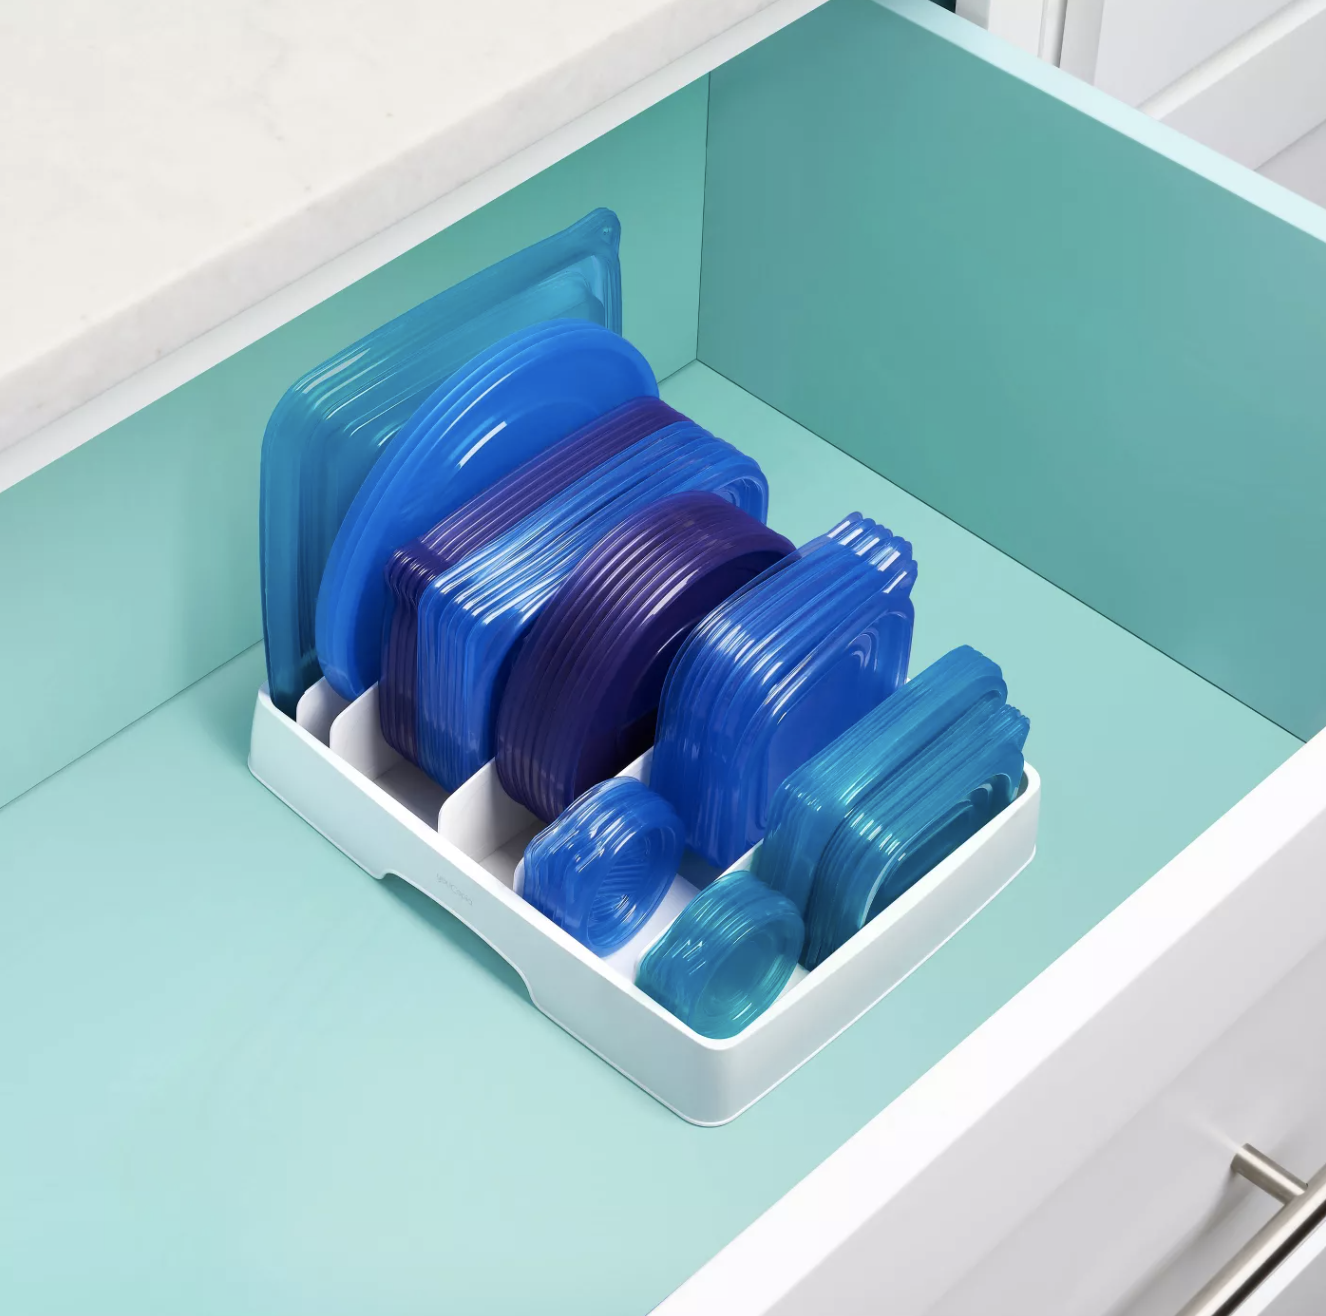 lid organizer holding different sized lids